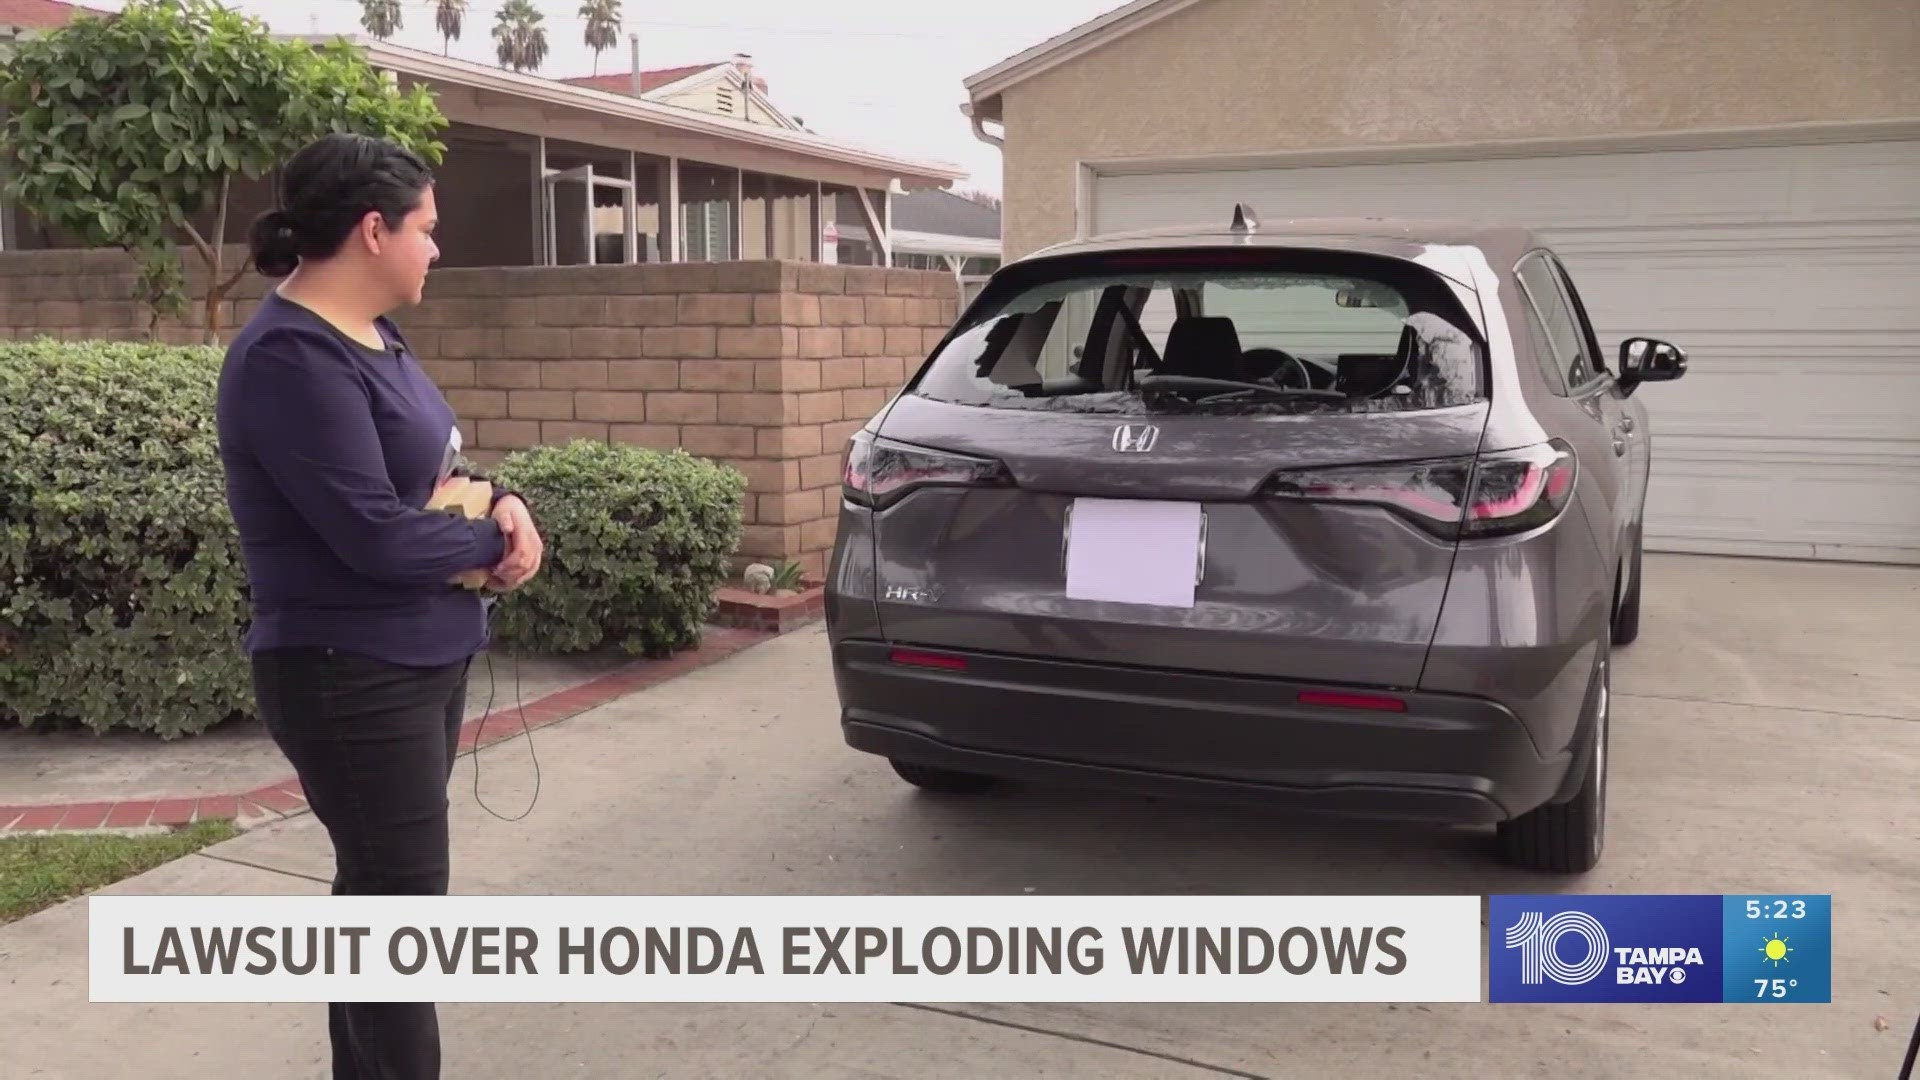 Consumer Reports said the defect should prove dangerous to HR-V owners and passengers.